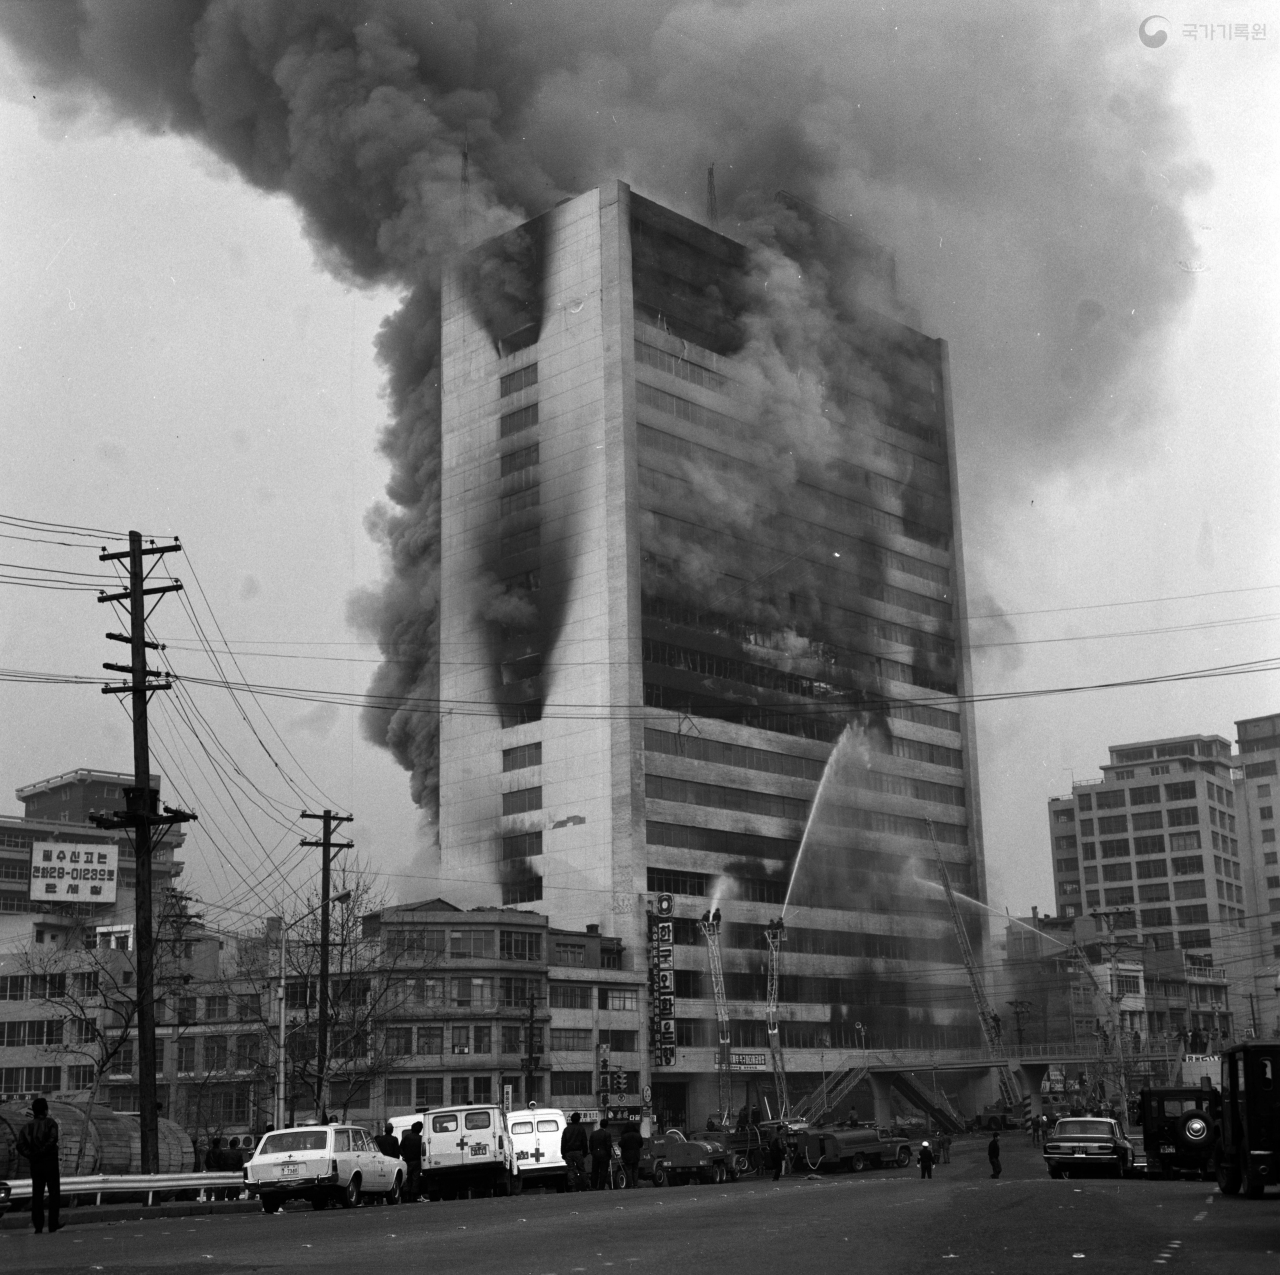 The tallest fire truck ladders available at the time could only reach the 7th floor, as shown in this photo. (National Archives of Korea)